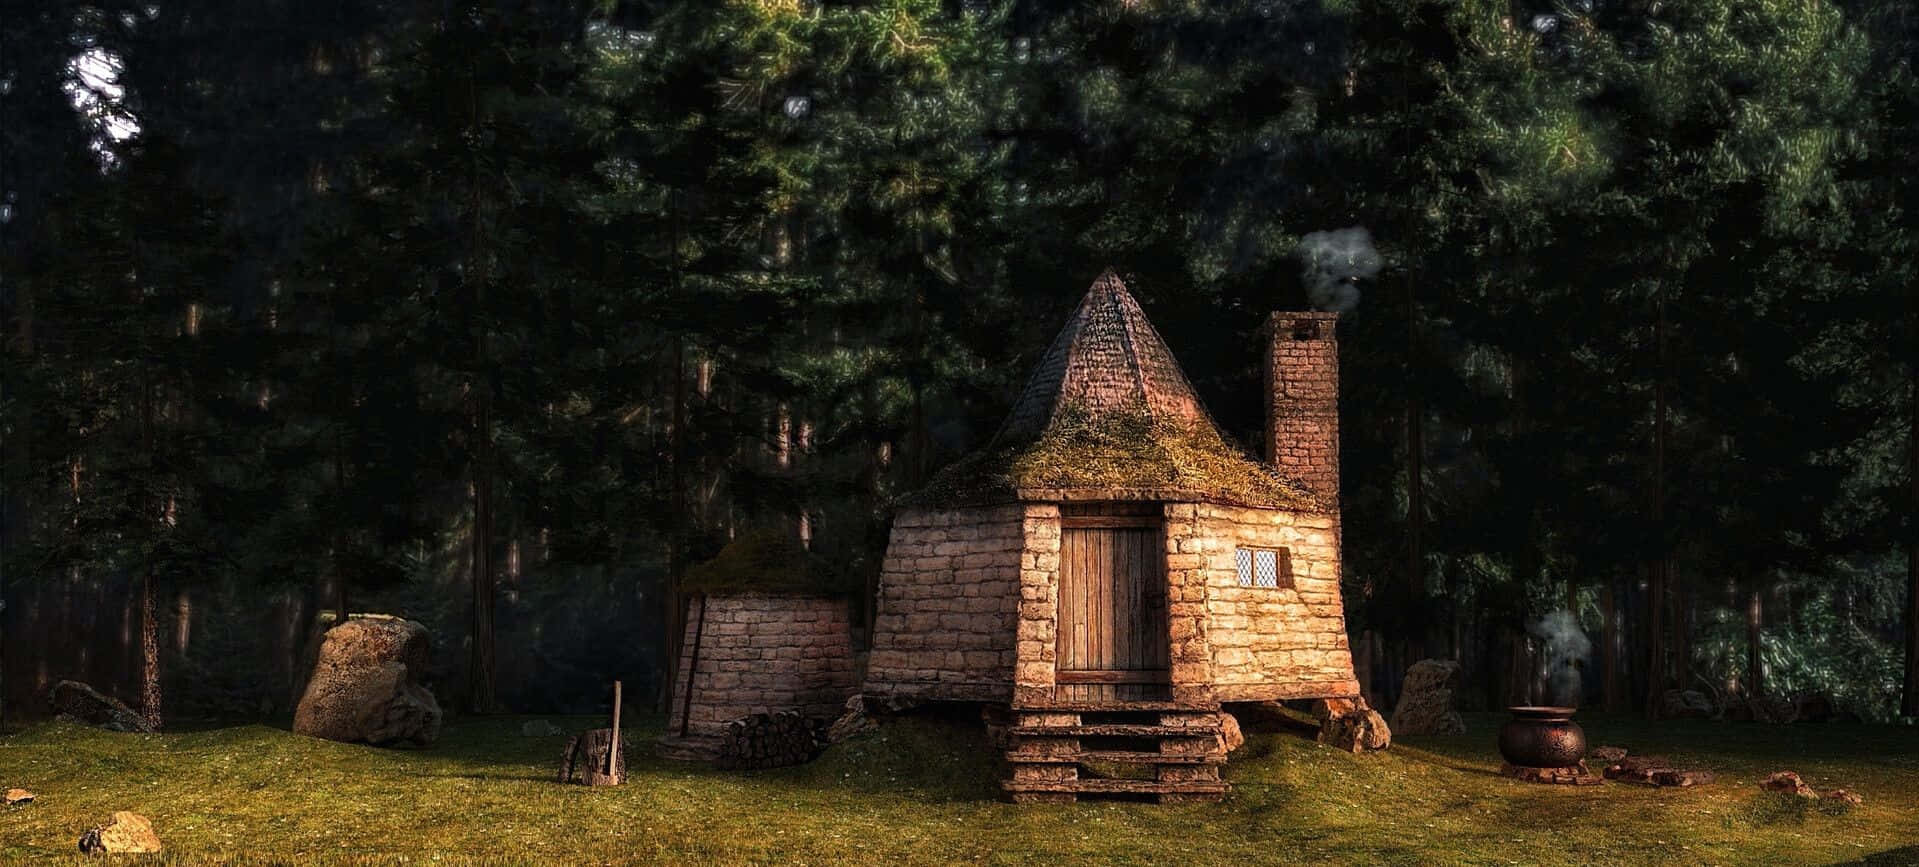 Magical Hut in the Enchanted Forest Wallpaper